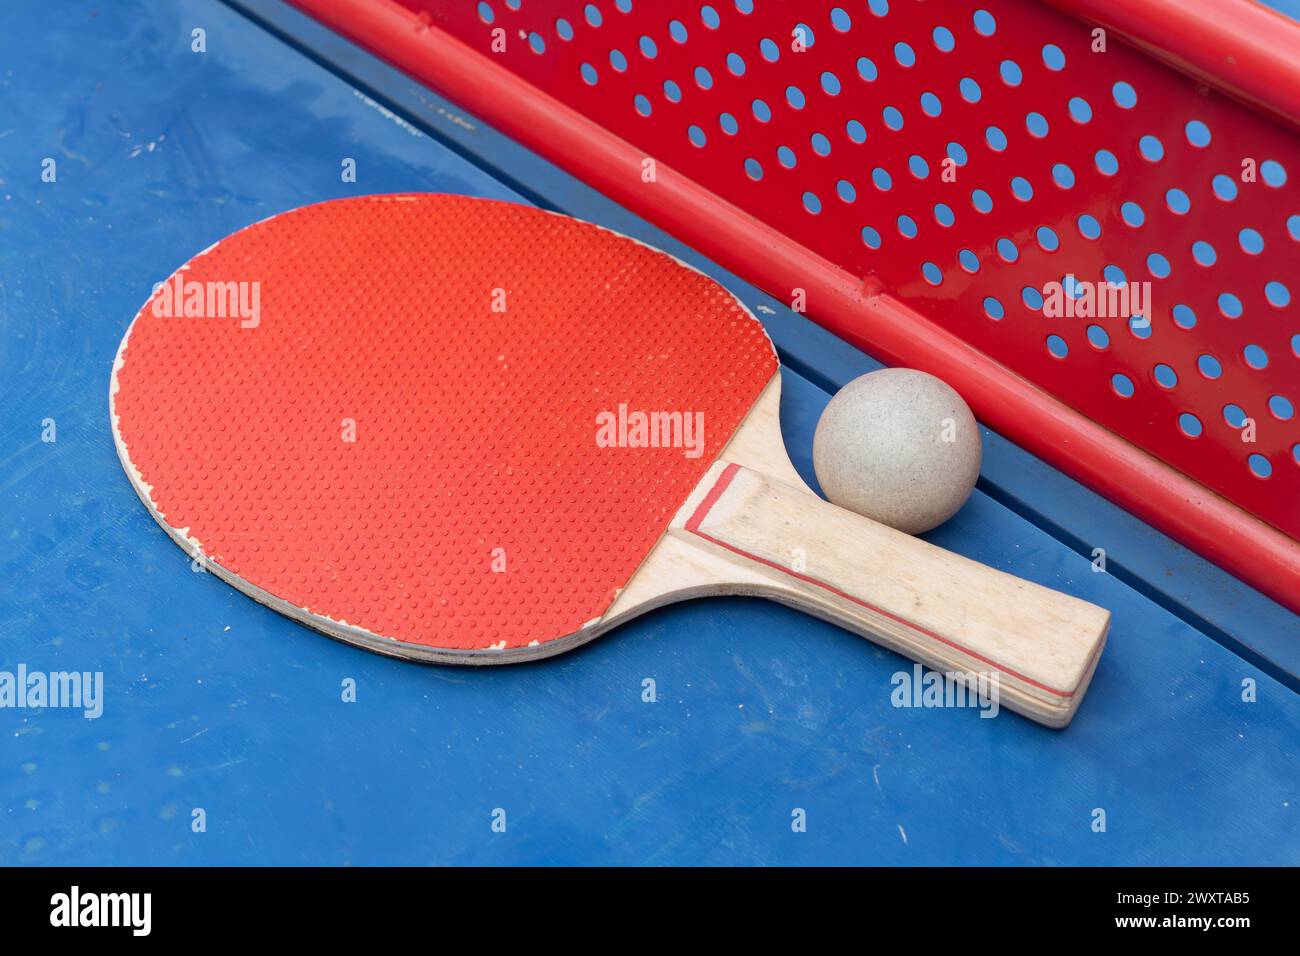 pingpong racket and ball and net on a blue pingpong table at horizontal composition Stock Photo